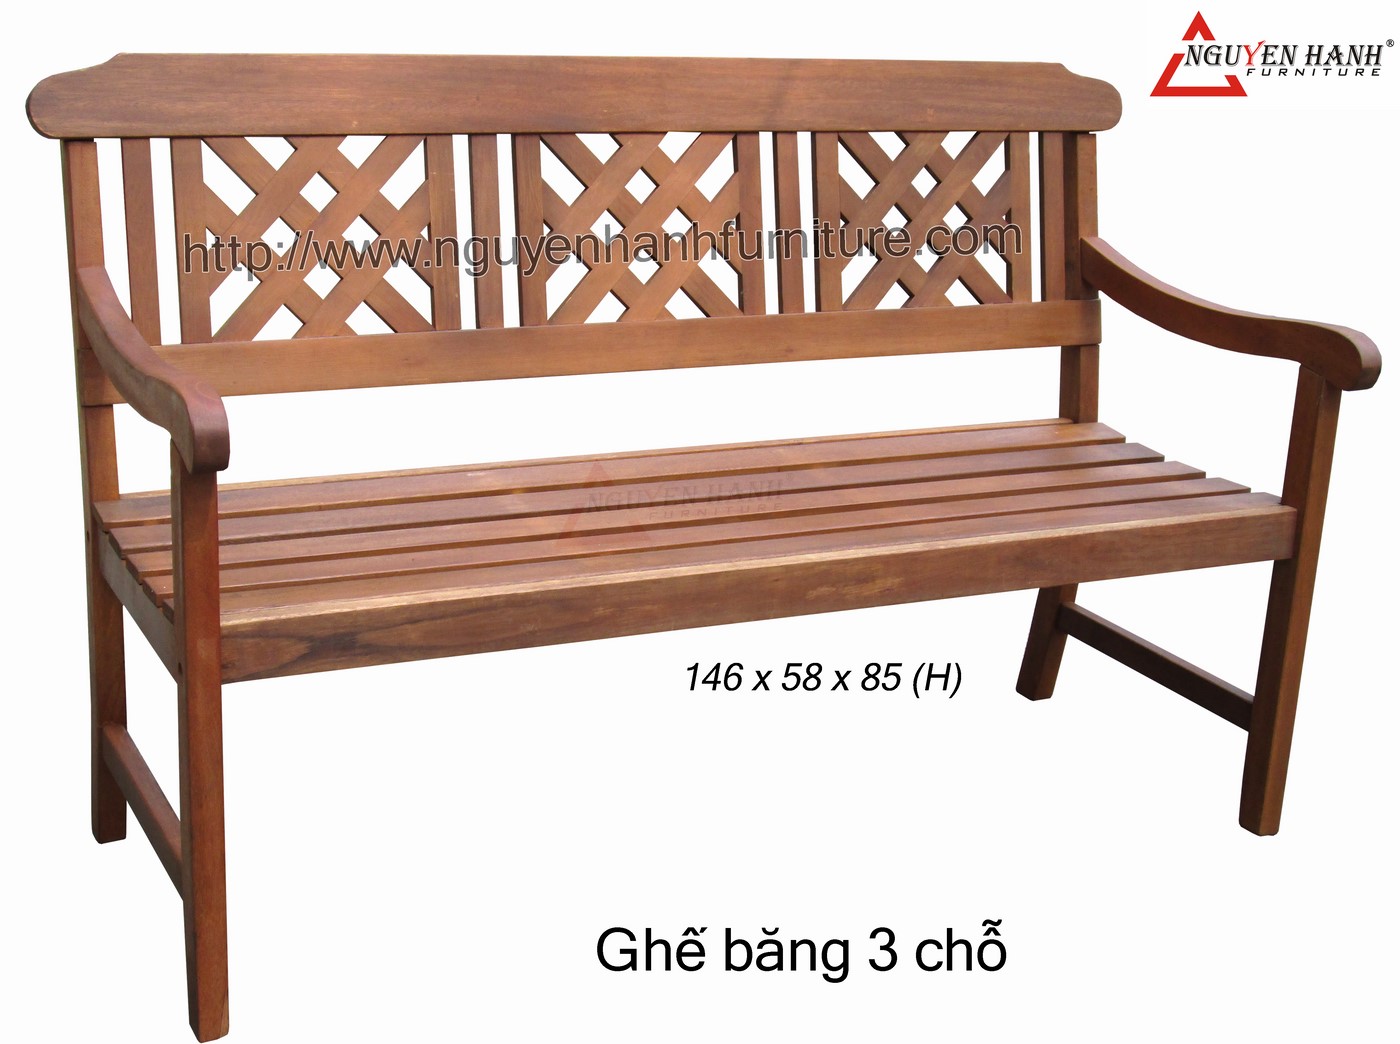 Name product: 3 seater Bench - Dimensions: 146 x 58 x 85 - Description: Red oil wood